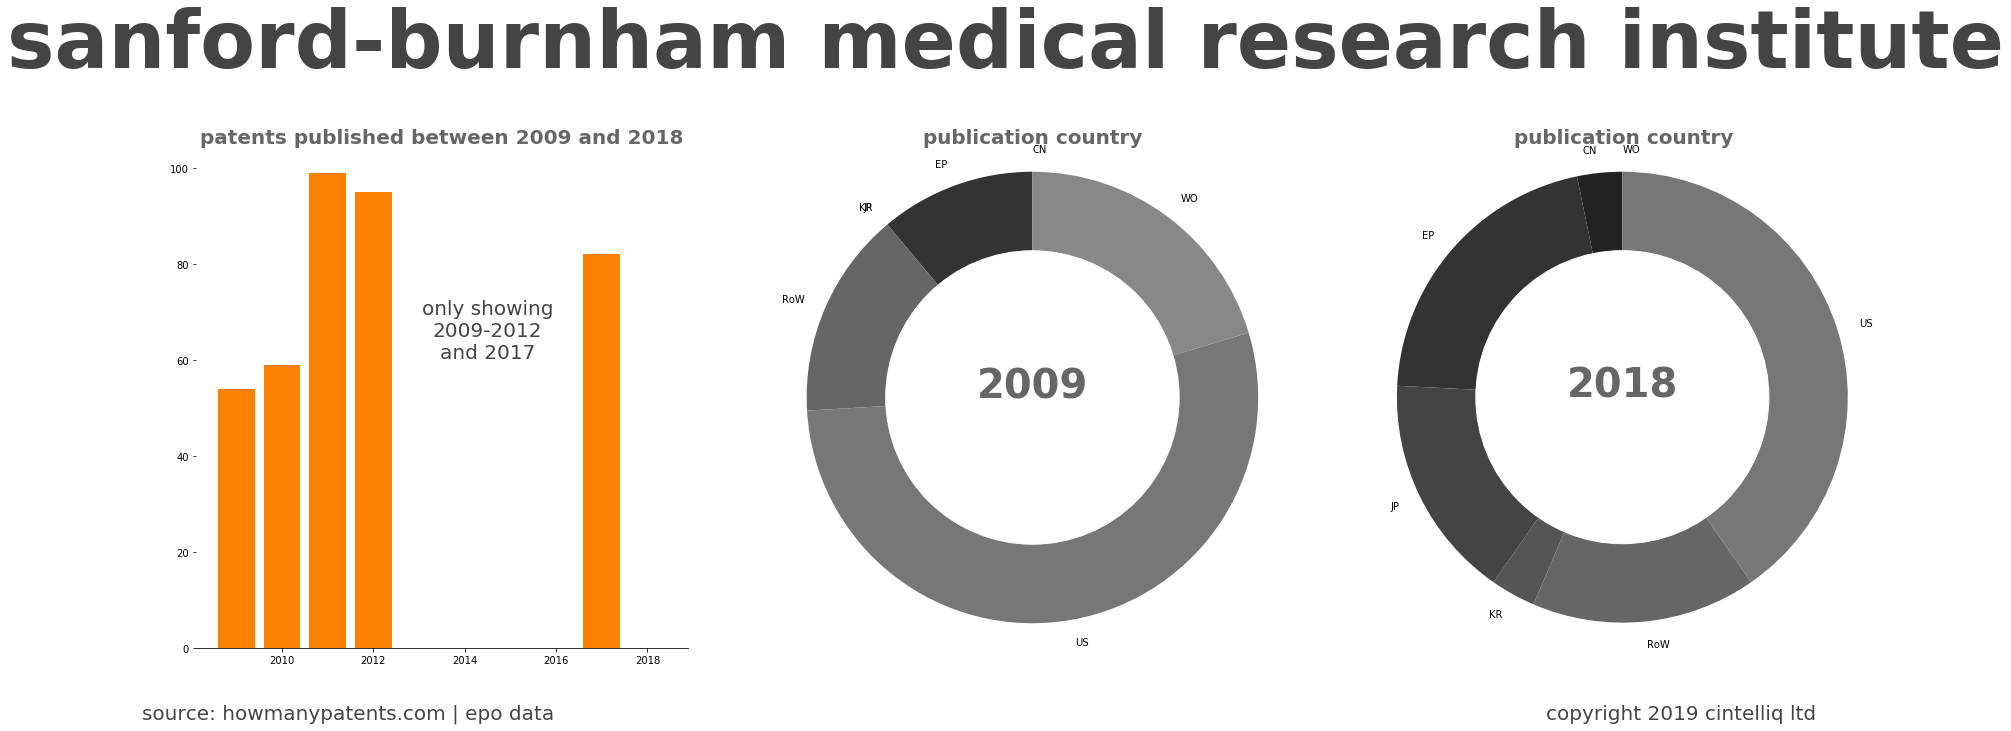 summary of patents for Sanford-Burnham Medical Research Institute